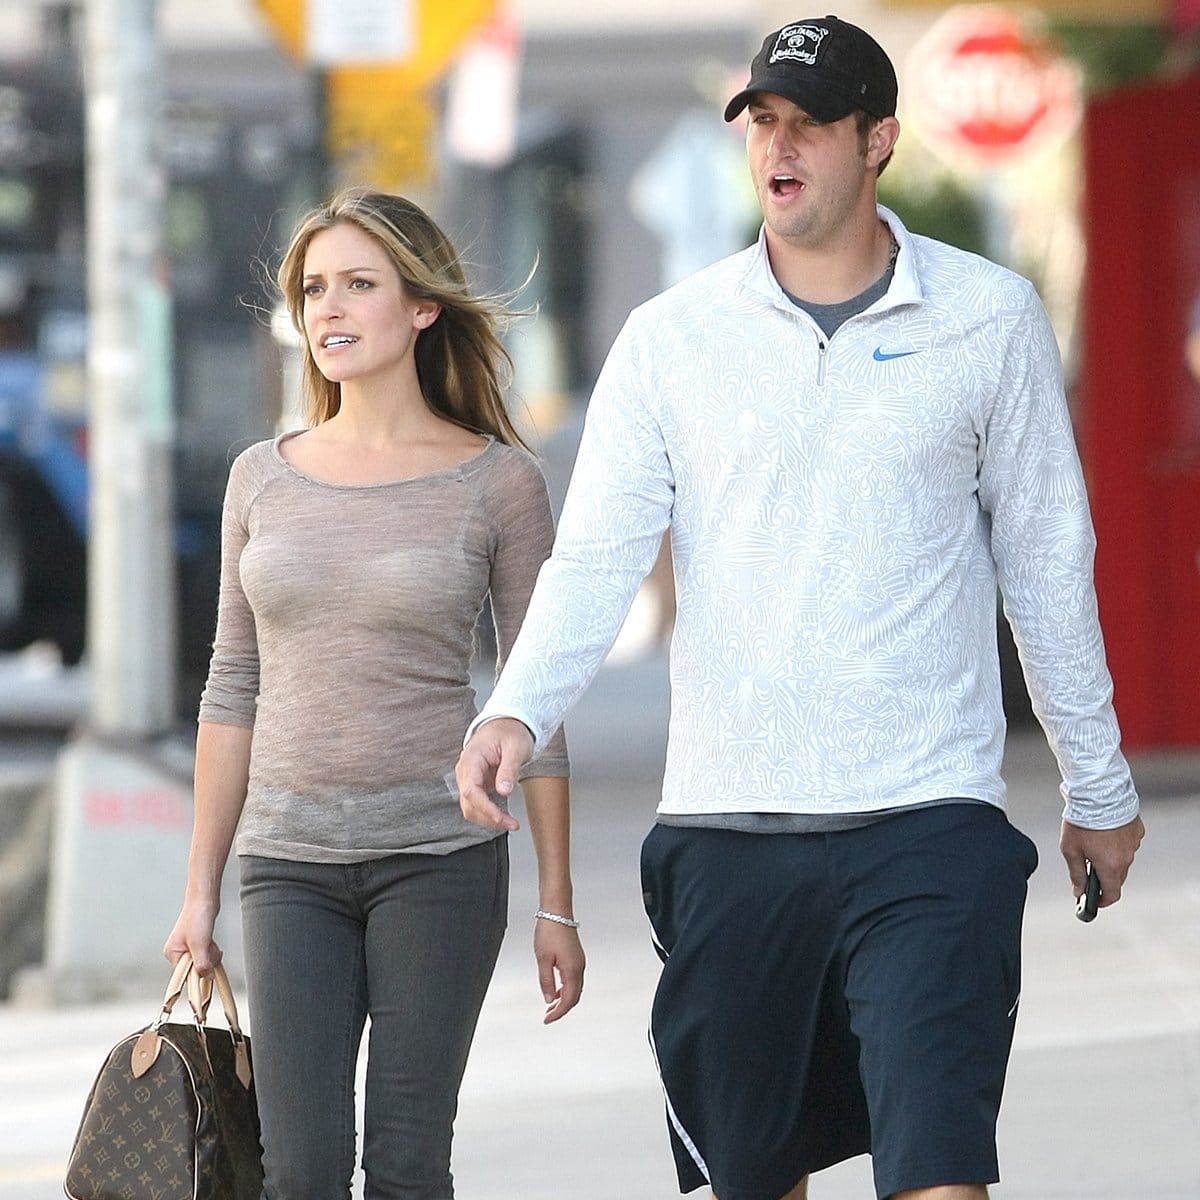 Kristin Cavallari and Jay Cutler met in 2010 after being introduced by Giuliana Rancic